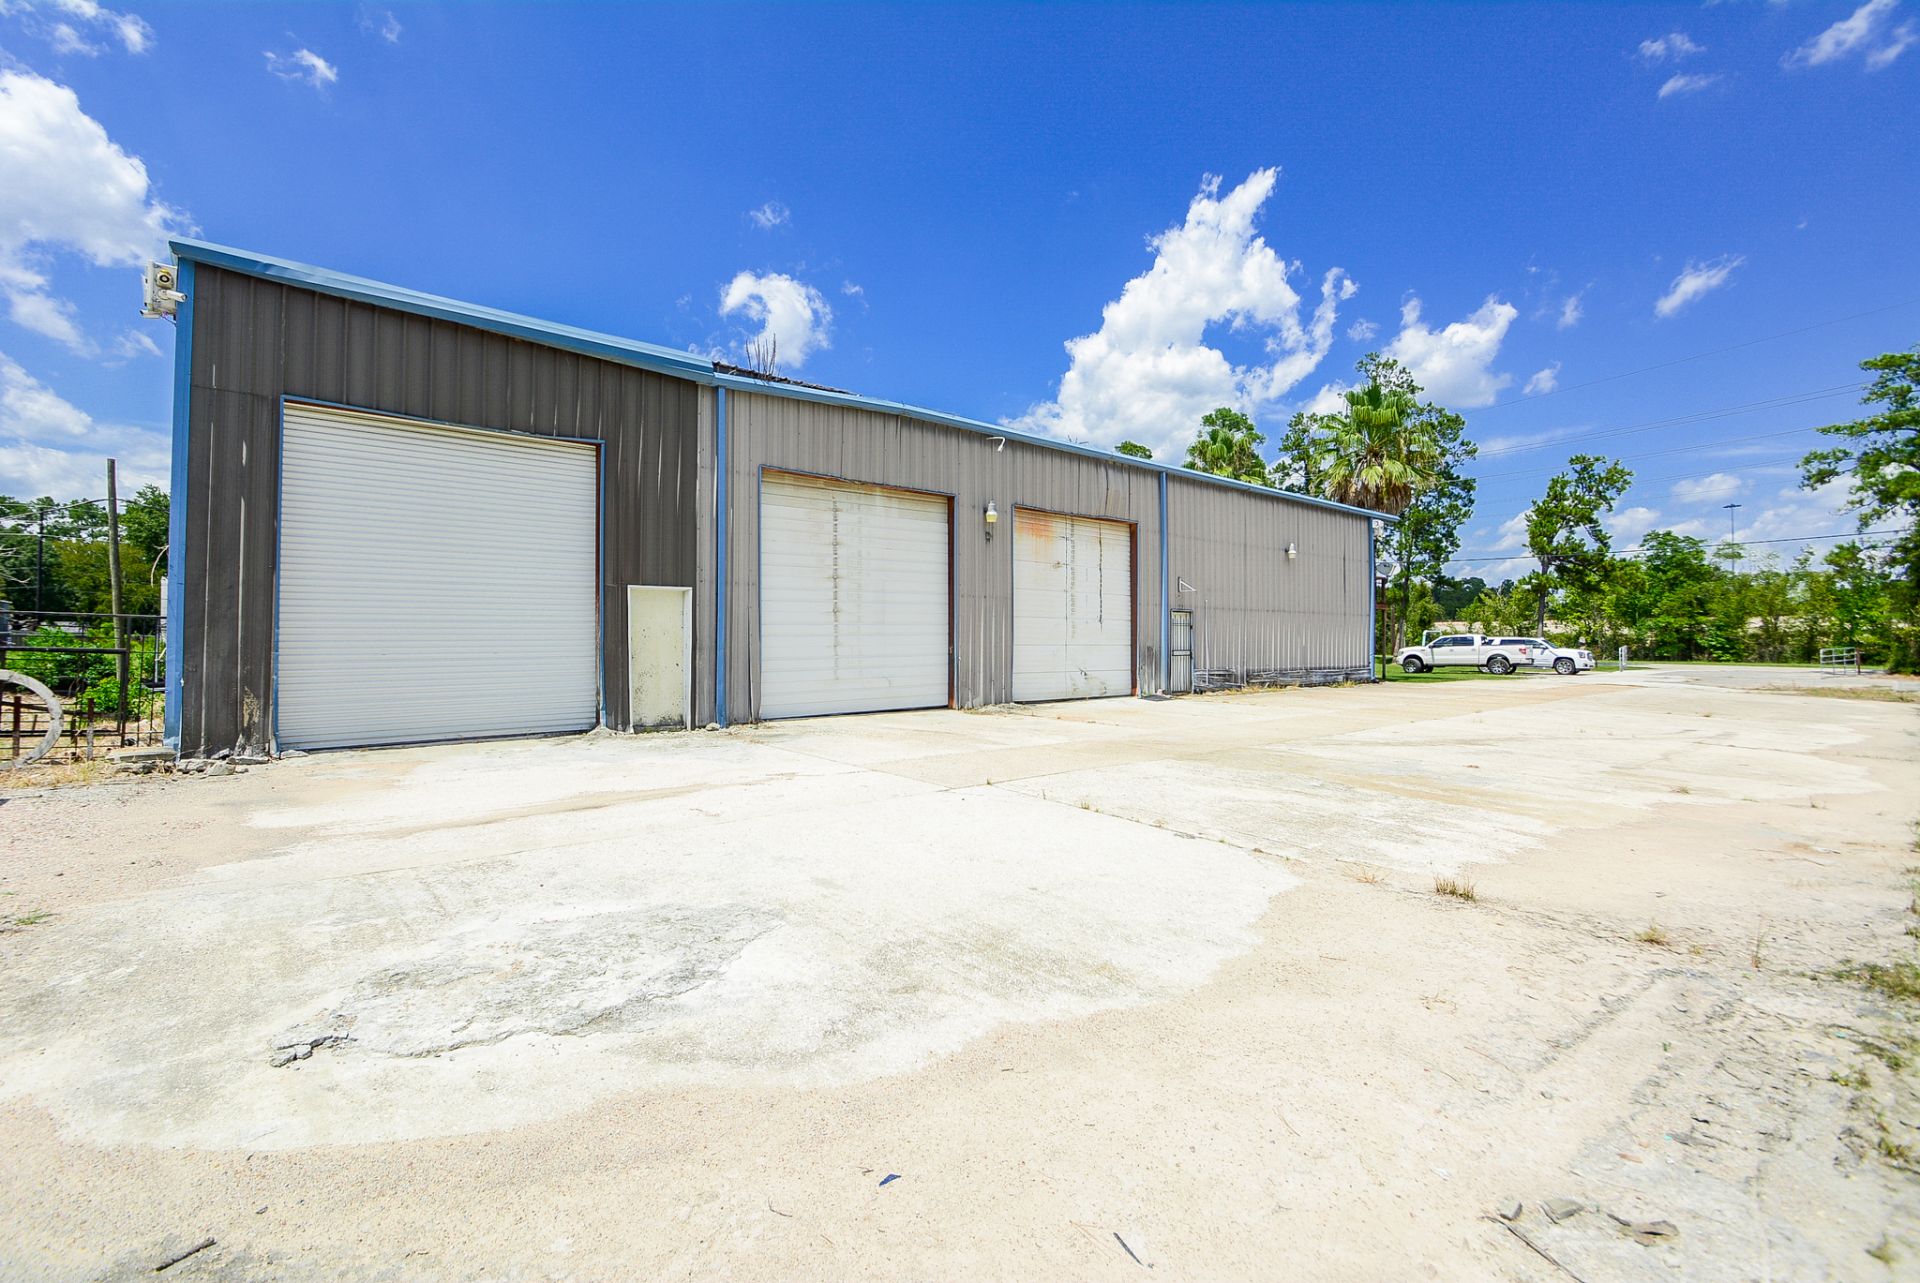 Industrial/Commercial Property on W Hardy in Spring, TX - Image 11 of 21